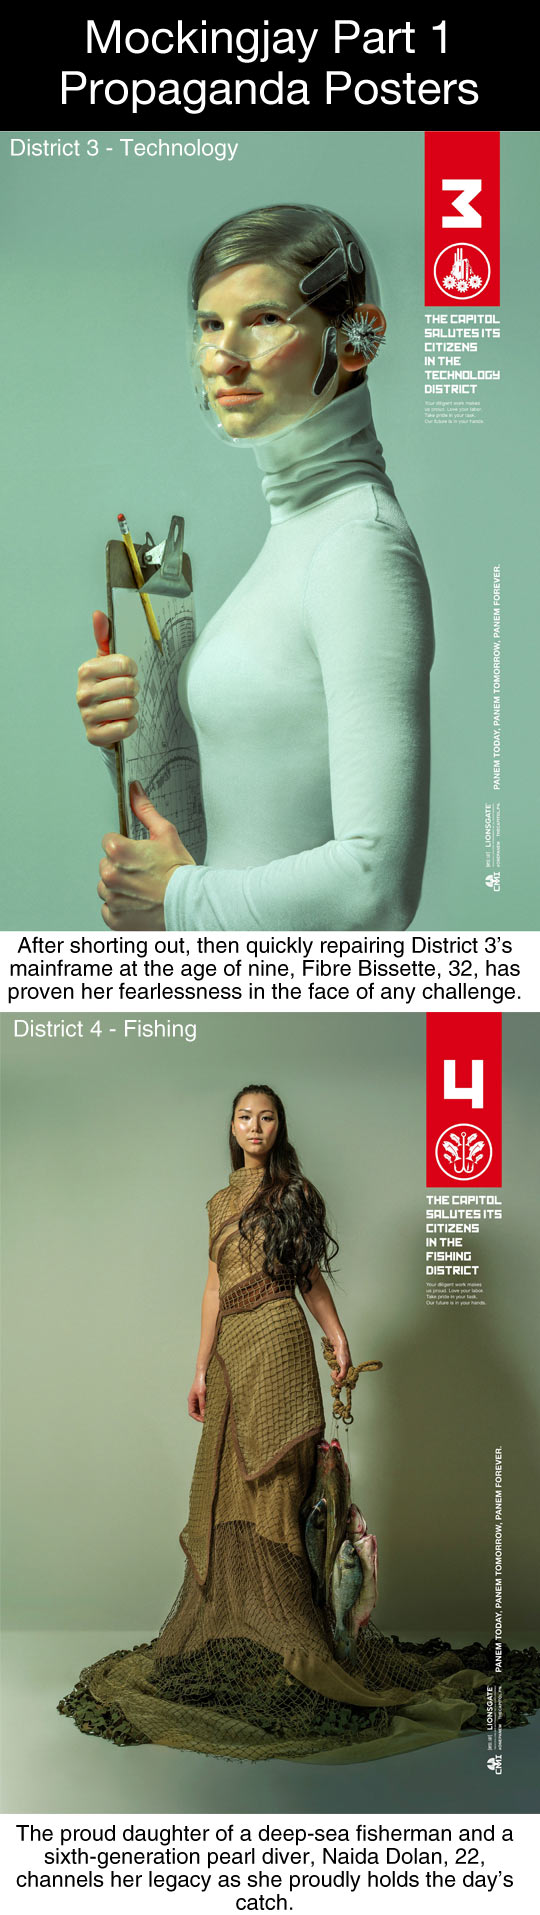 cool-Mockingjay-posters-districts-technology